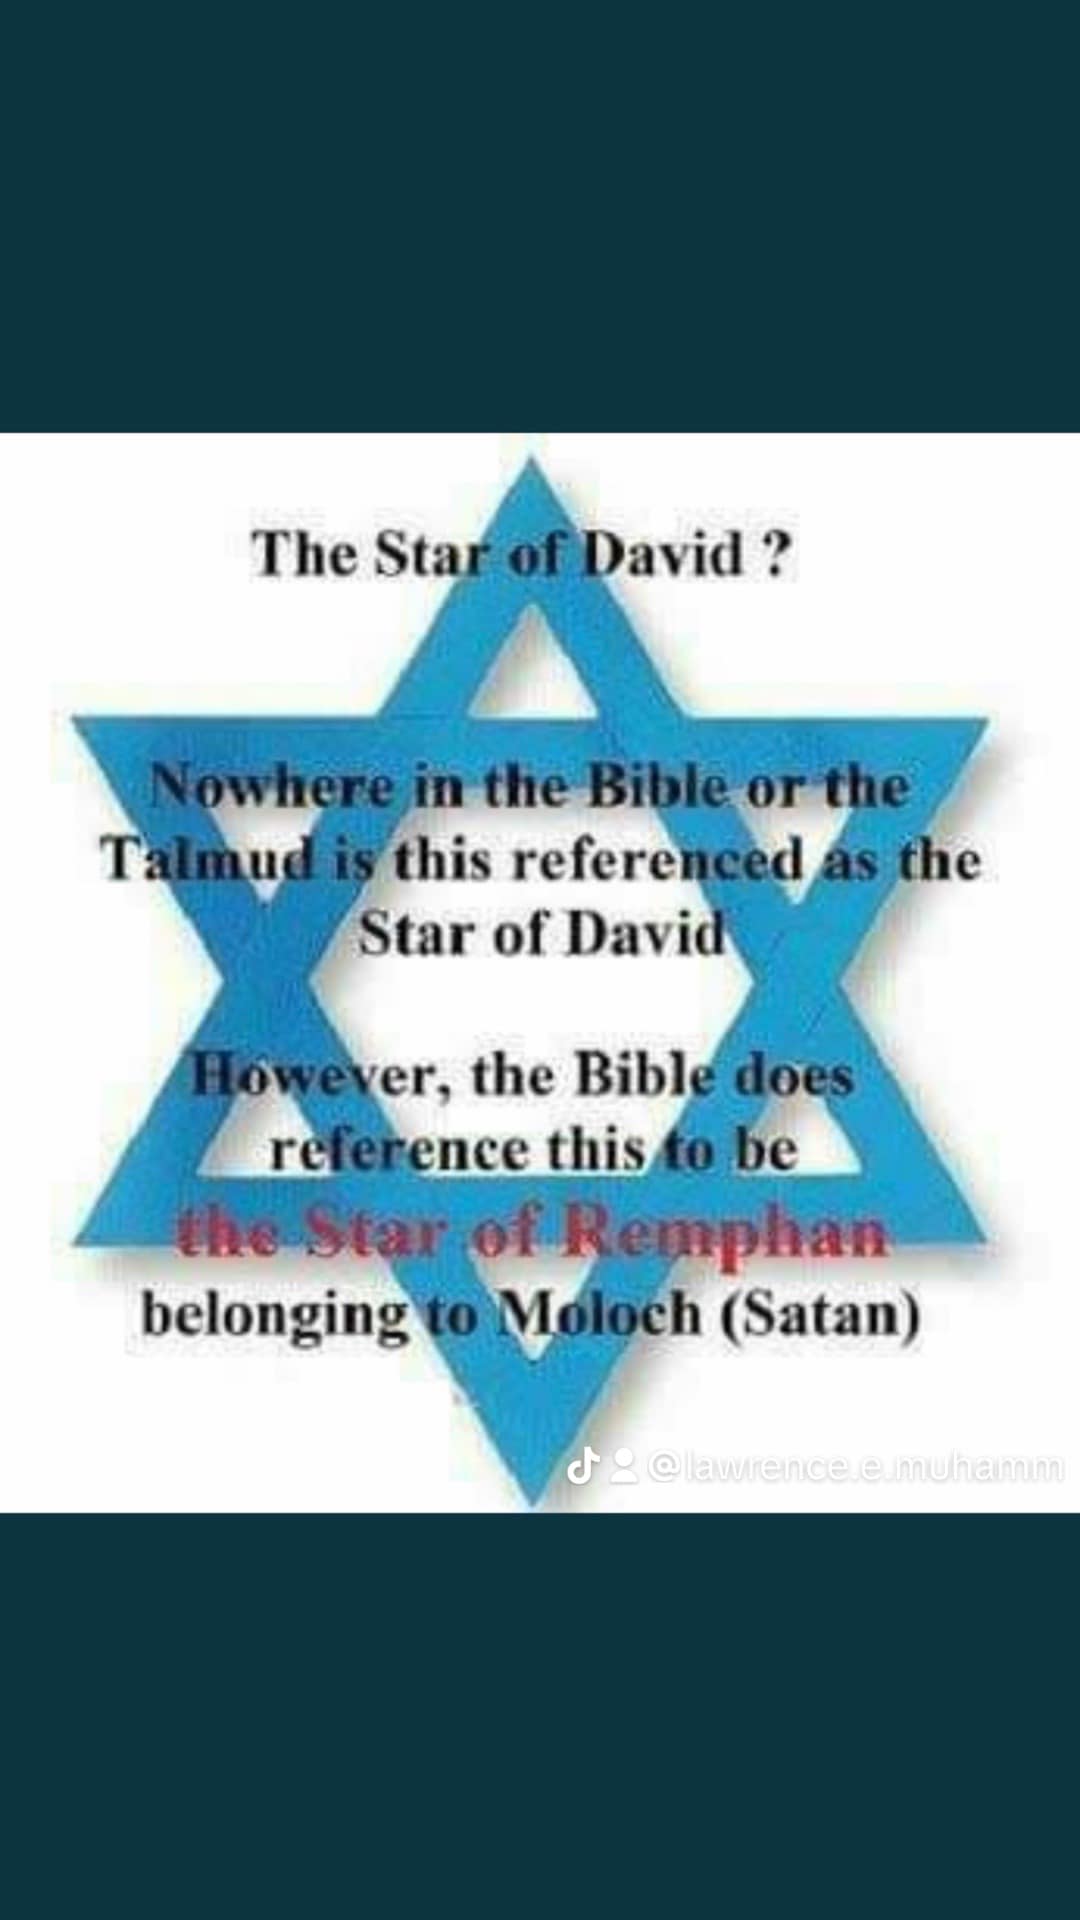 #1 a image of the Star of Zionism (Satan)